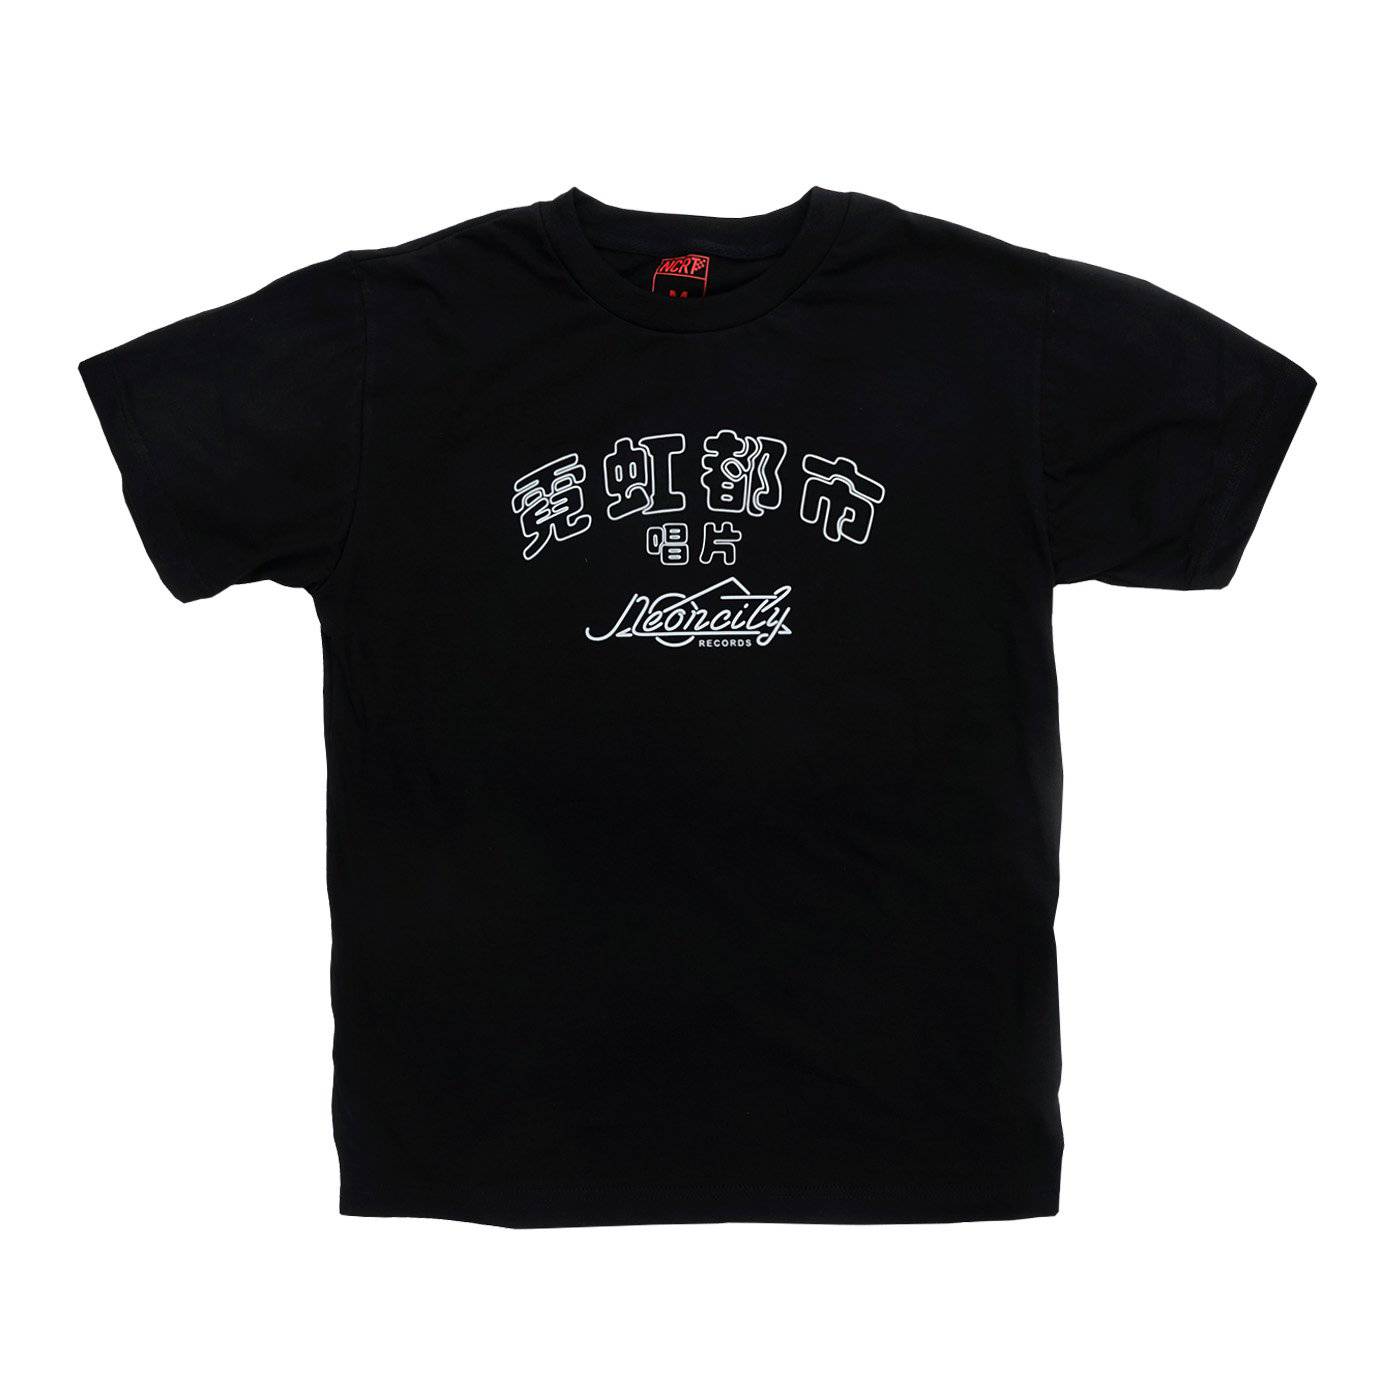 Neoncity Records 3M Reflective T-Shirt - NCRT